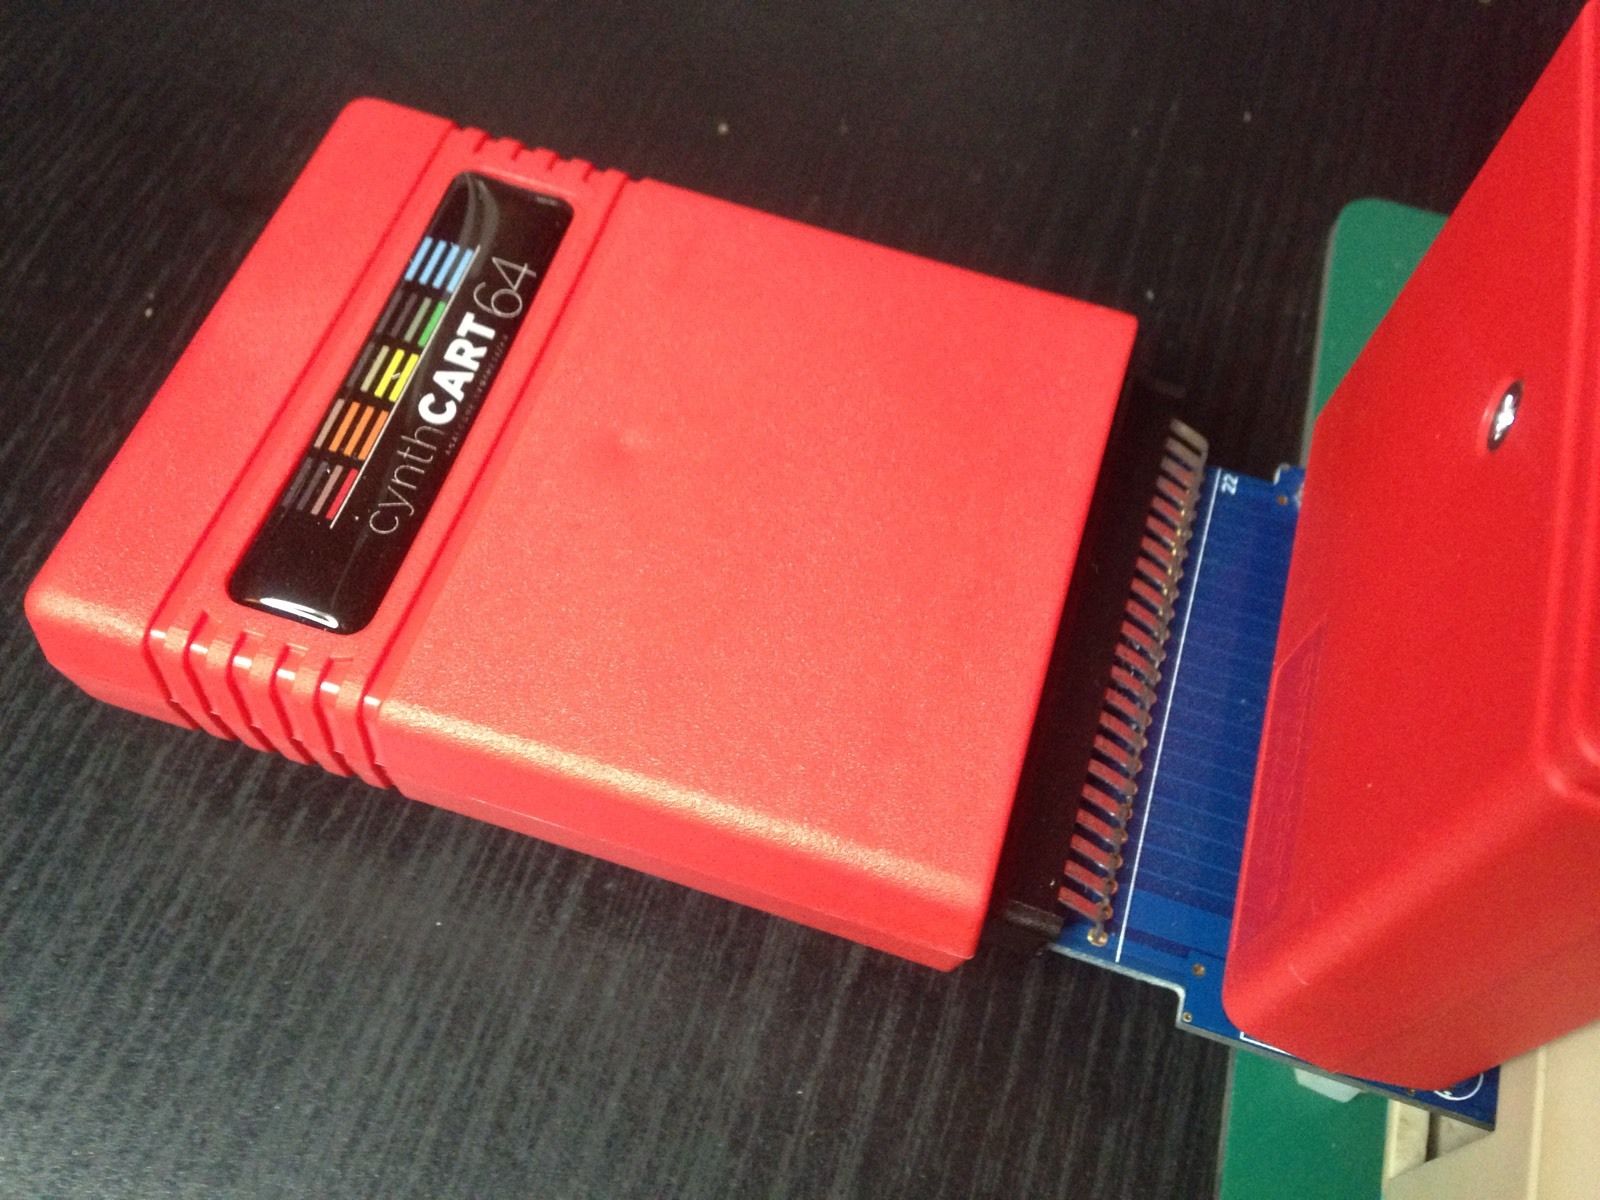 midi-2 Datel MIDI Interface Cartridge with instructions for Commodore 64/128 - GameDude Computers